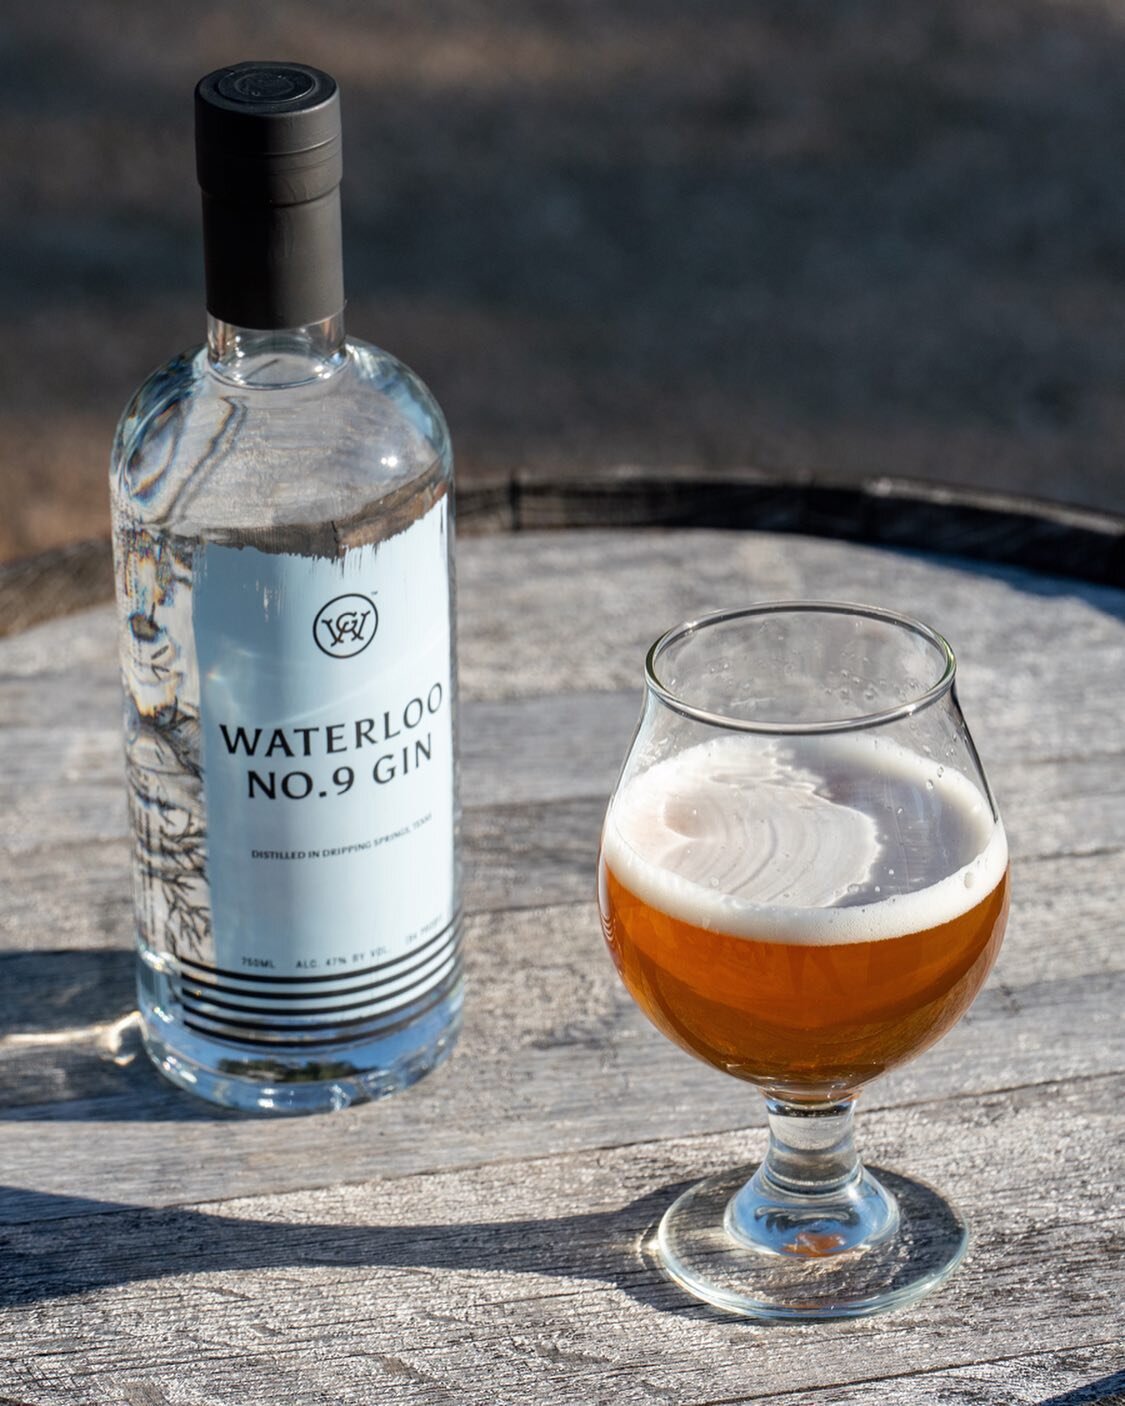 The Tripel No. 4
A Waterloo Tripel No. 4 Inspired Ale using four of the botanicals used in making Waterloo No.9 Gin juniper berries, coriander, ginger, lemon peel. Deceptively strong, with notes from the botanicals as well as some banana on the nose.